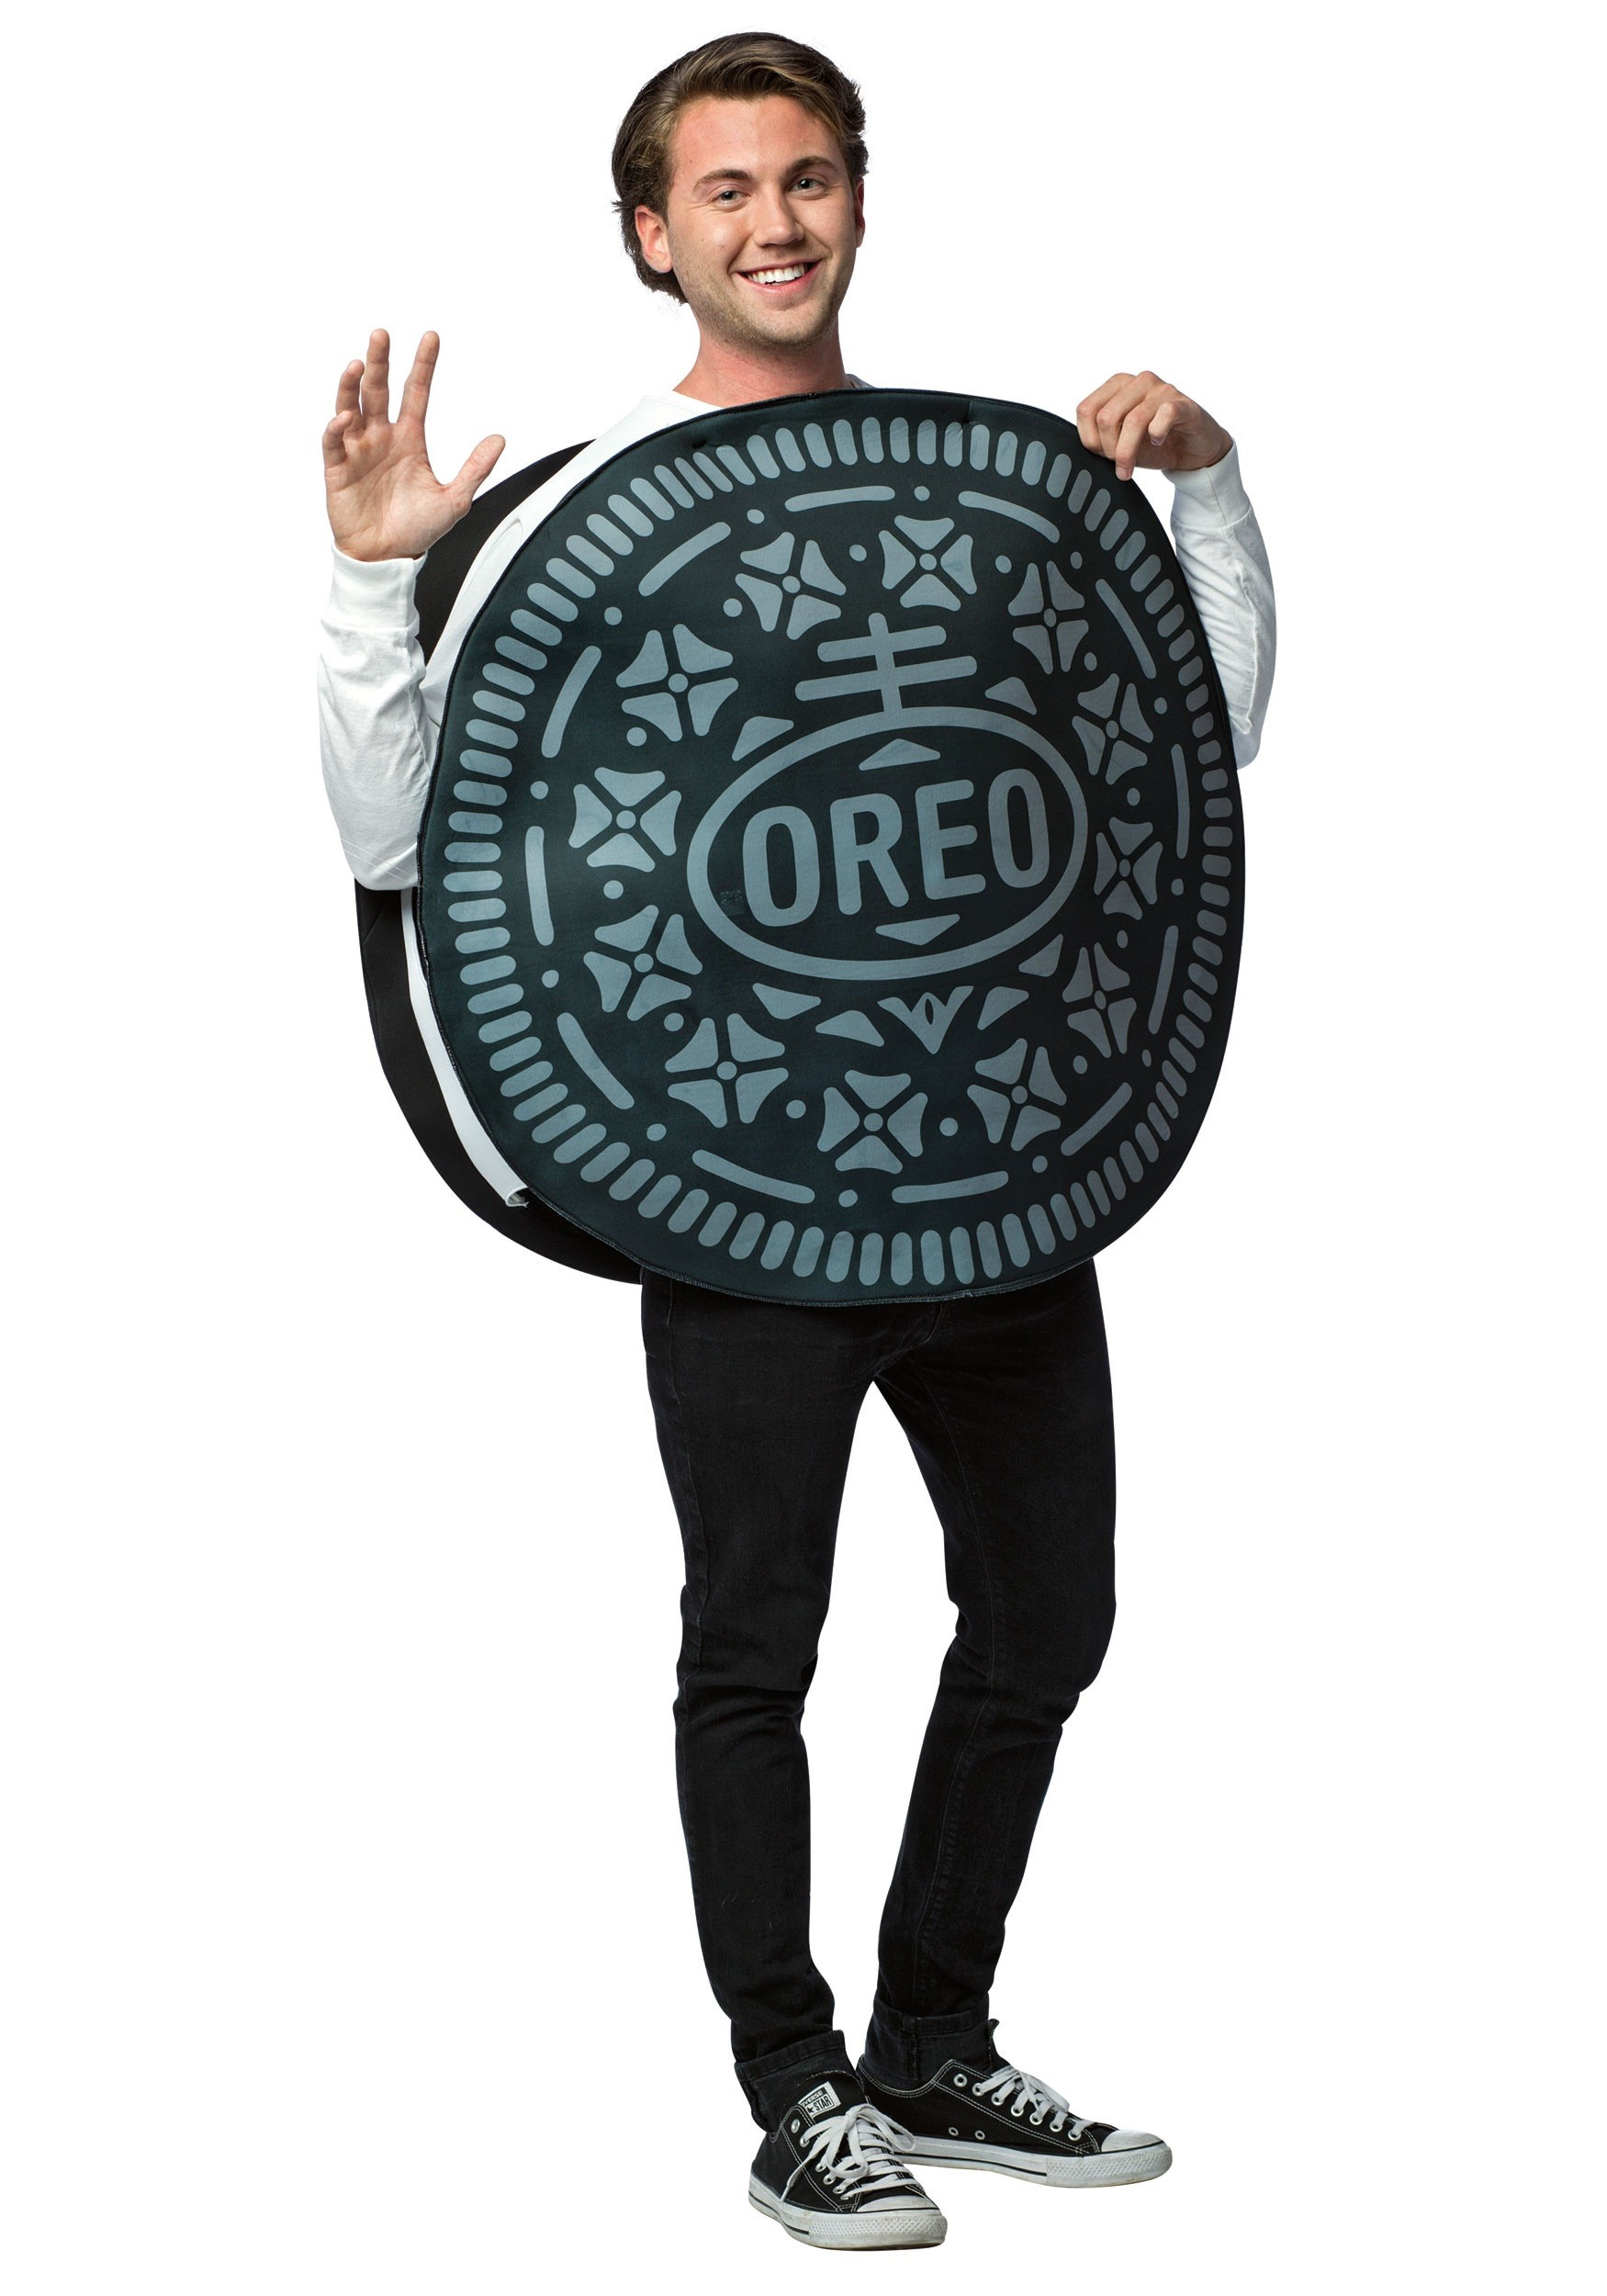 Cookies Halloween Costumes
 Oreo Cookie Costume for Adults